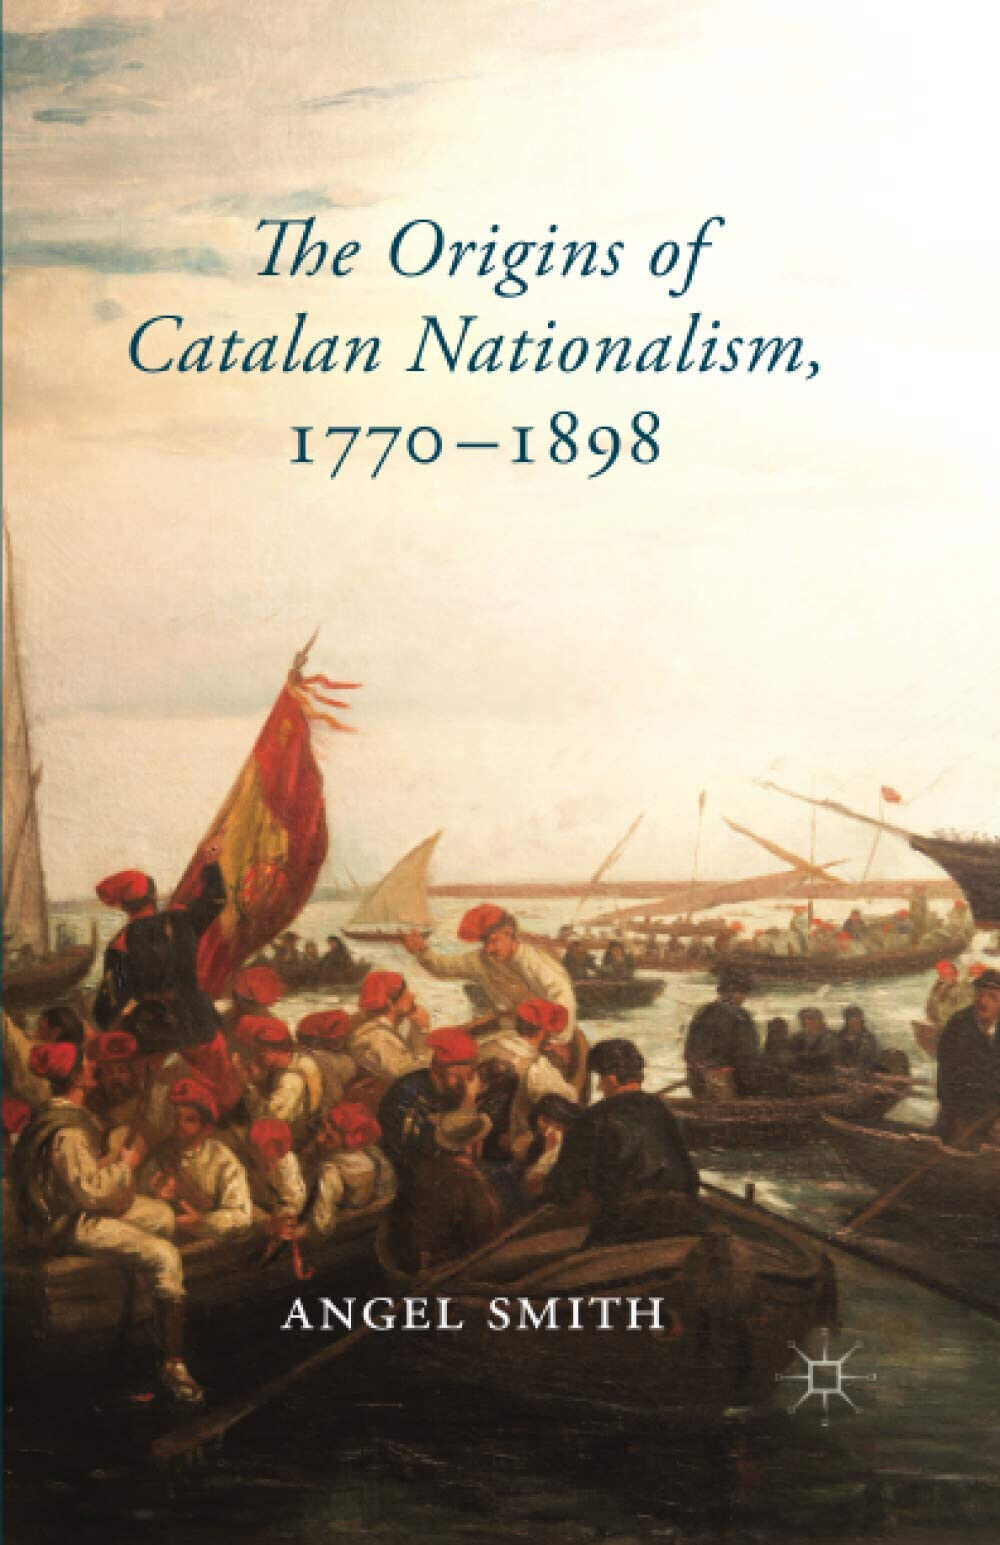 The Origins of Catalan Nationalism, 1770-1898 - Angel Smith - Palgrave, 2014